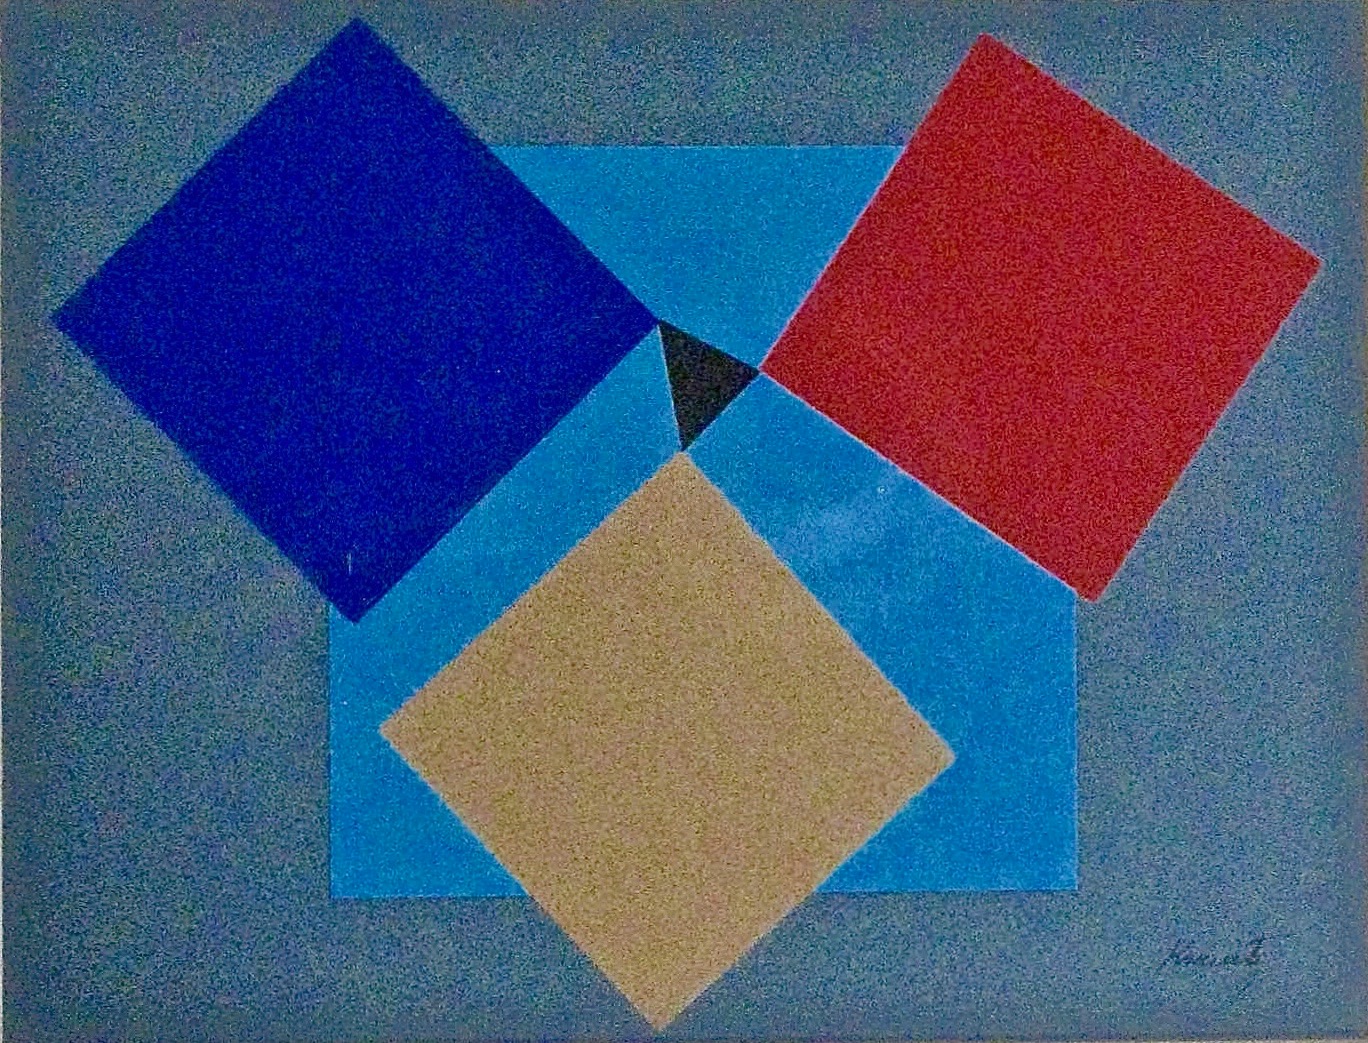 The Balancing Squares, 1982, Collage, 16x20 inches with mat